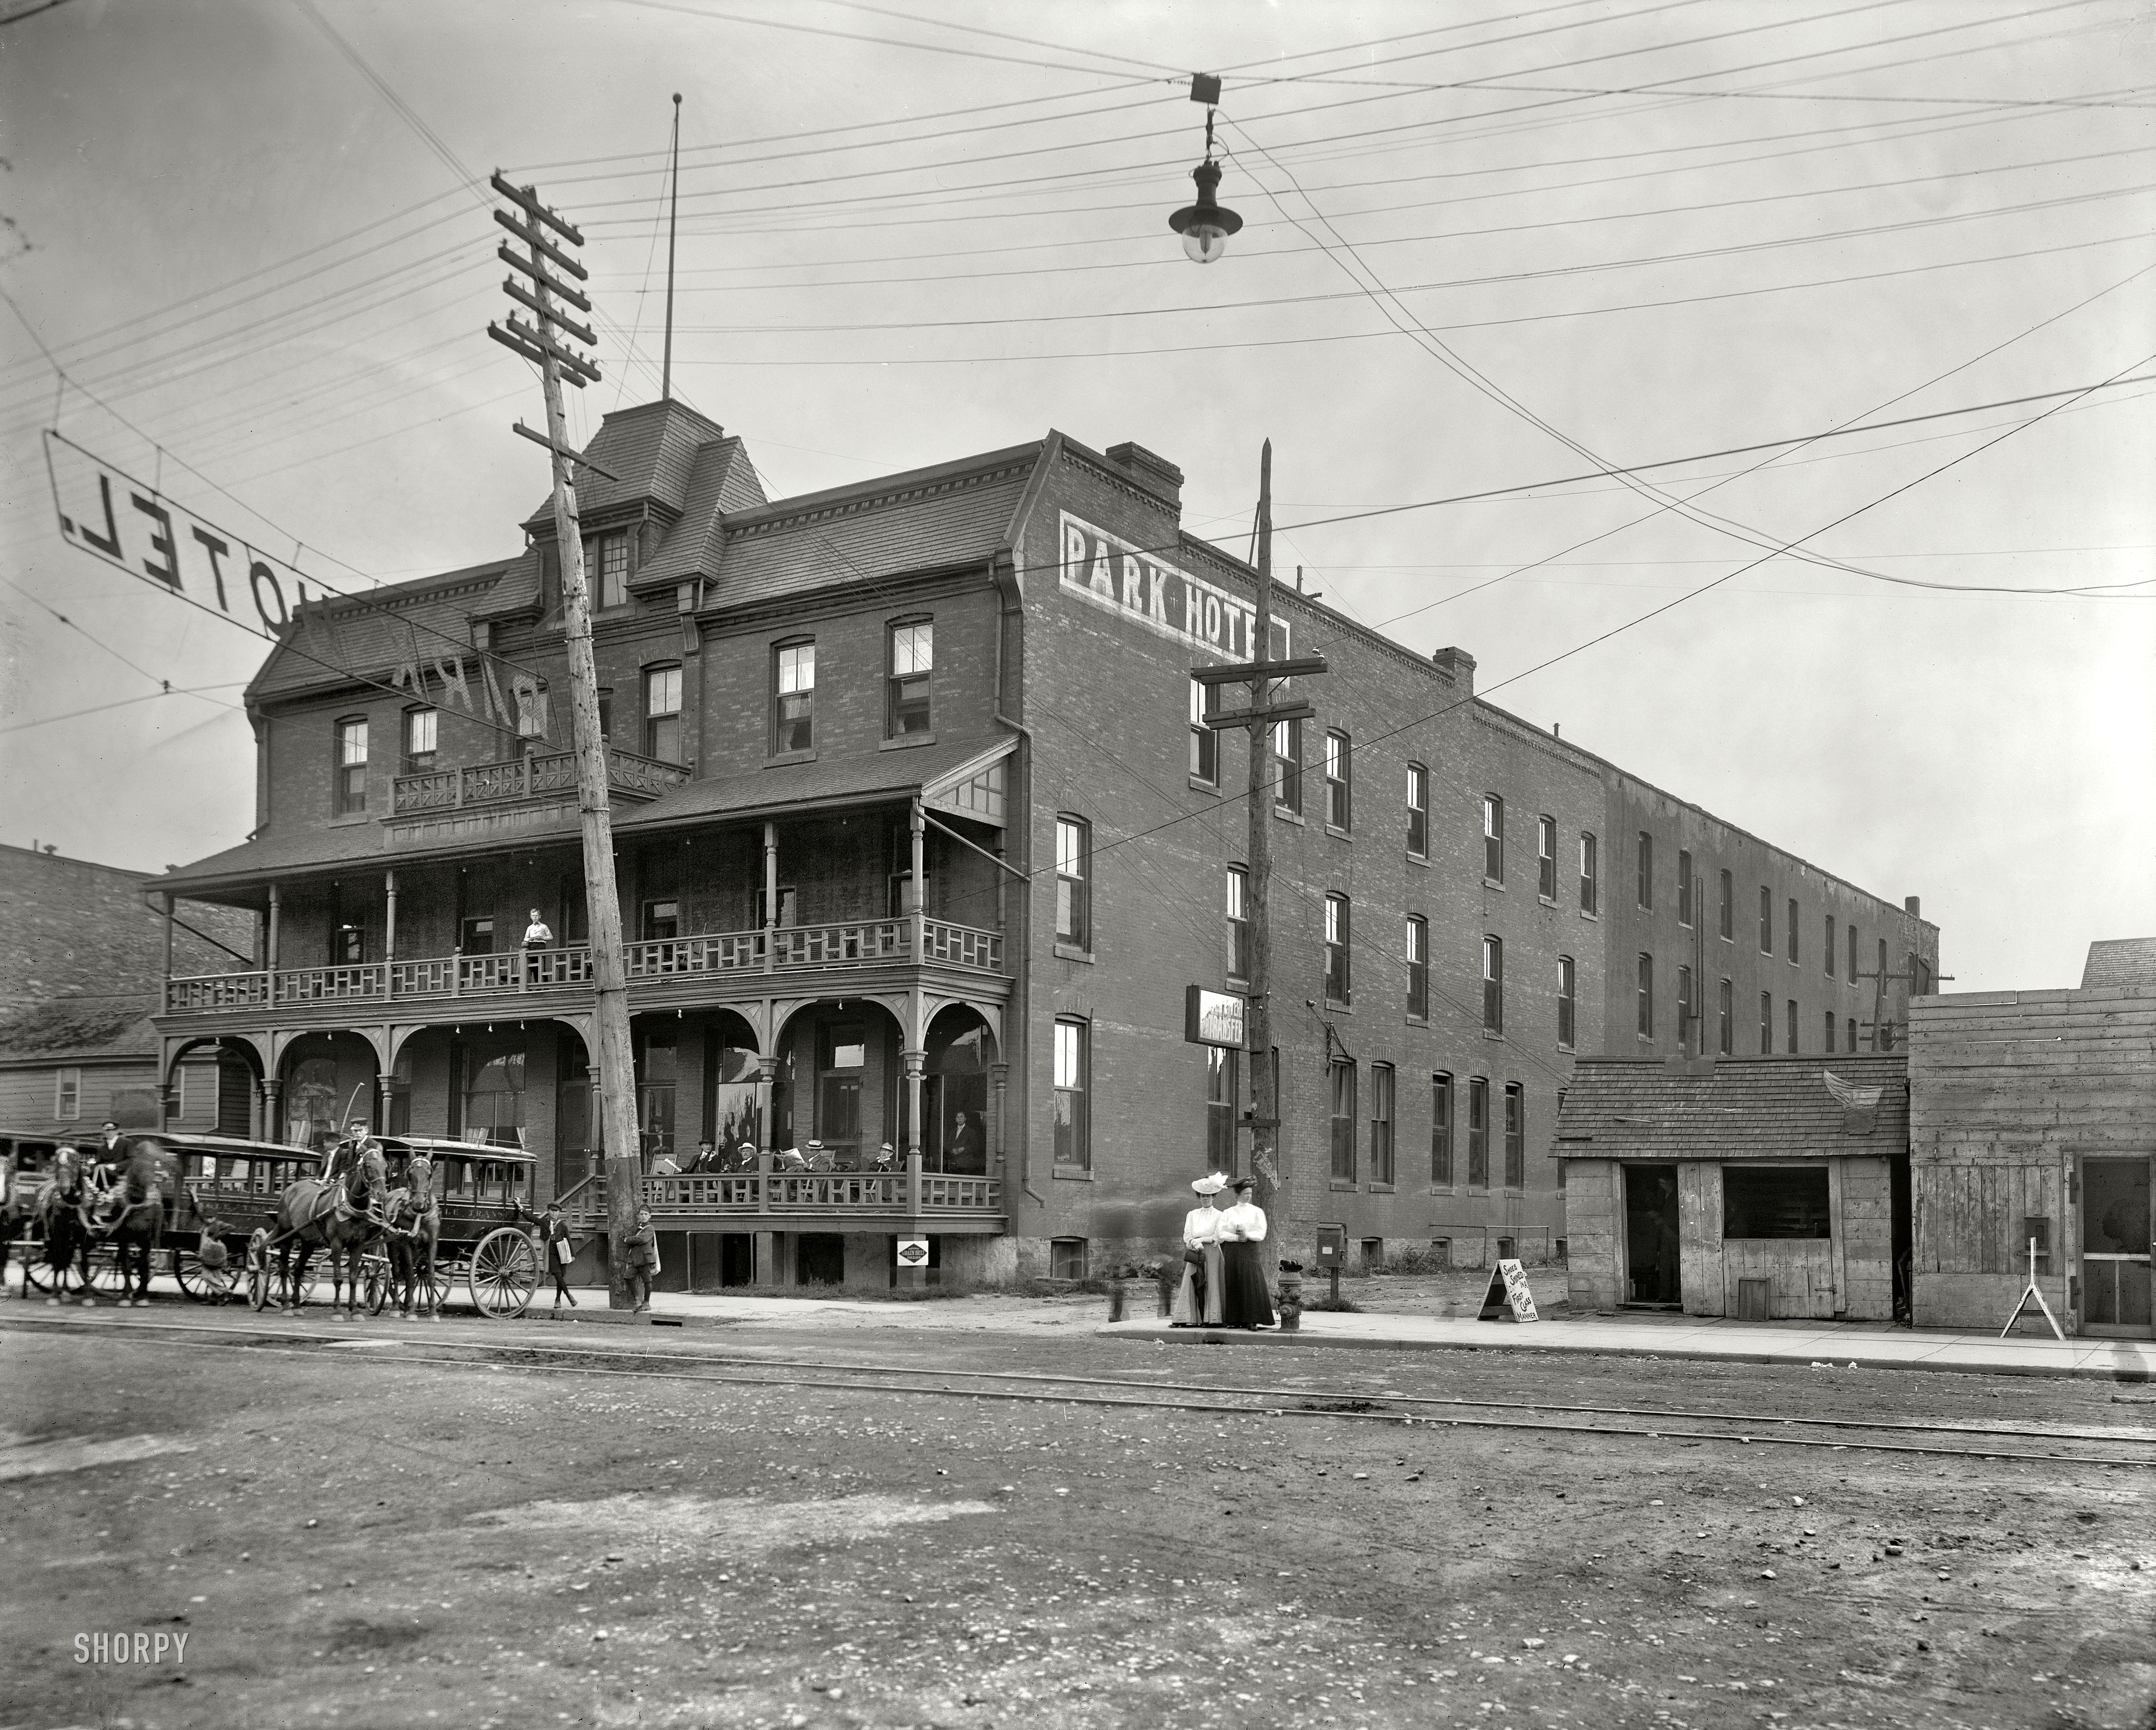 Sault Sainte Marie, Michigan, circa 1905. "Park Hotel." An interesting cast of characters in less than parklike surroundings. Detroit Publishing. View full size.